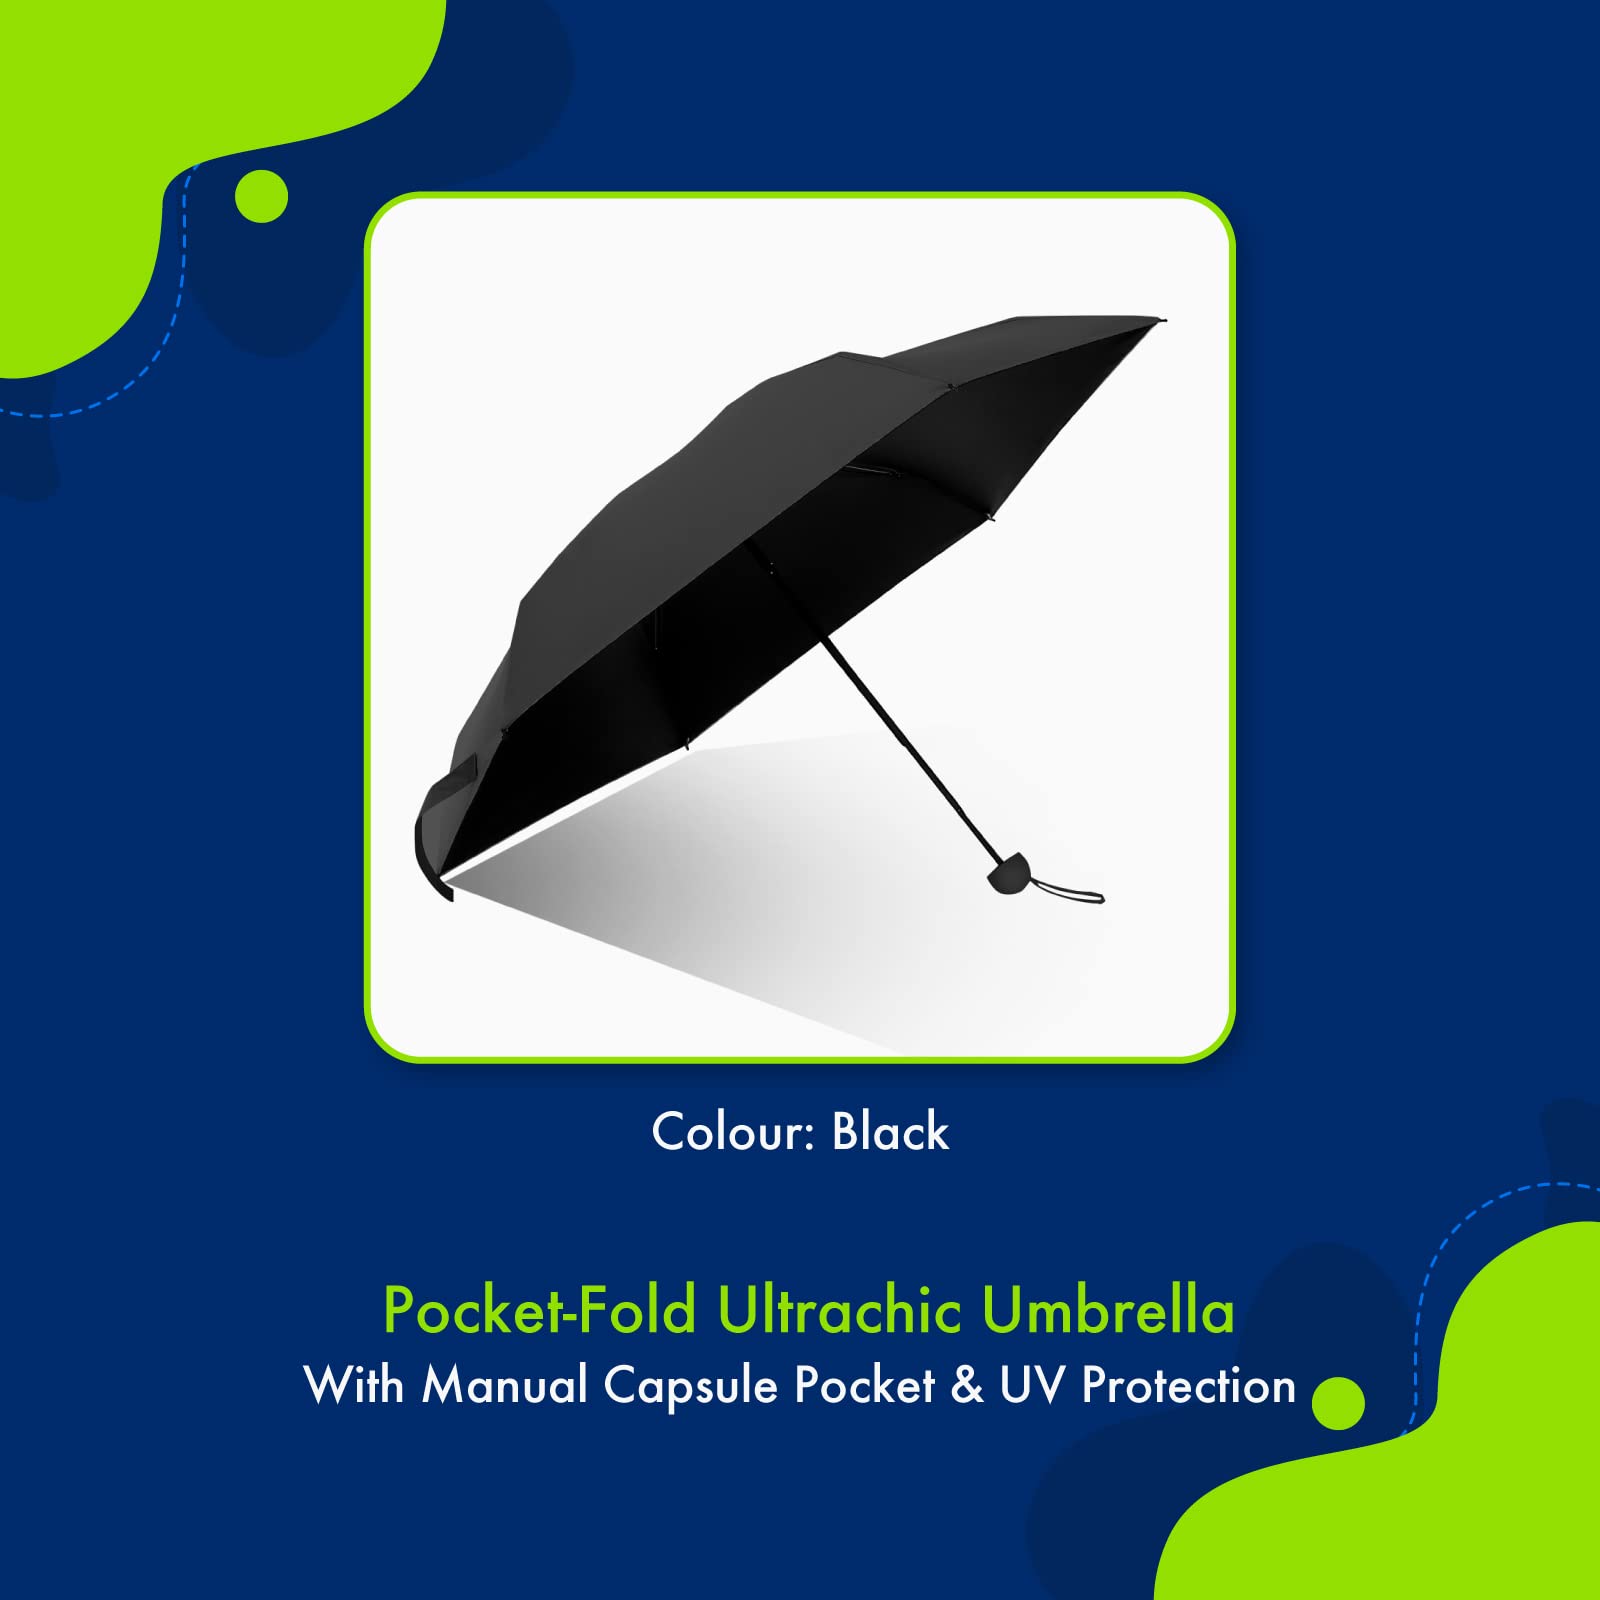 ABSORBIA Unisex 5 fold Umbrella with capsule cover for Rain & Sun Protection and also windproof | Double Layer Folding Portable Umbrella| Black colour | Fancy and Easy to Travel | Open Diameter 97CM